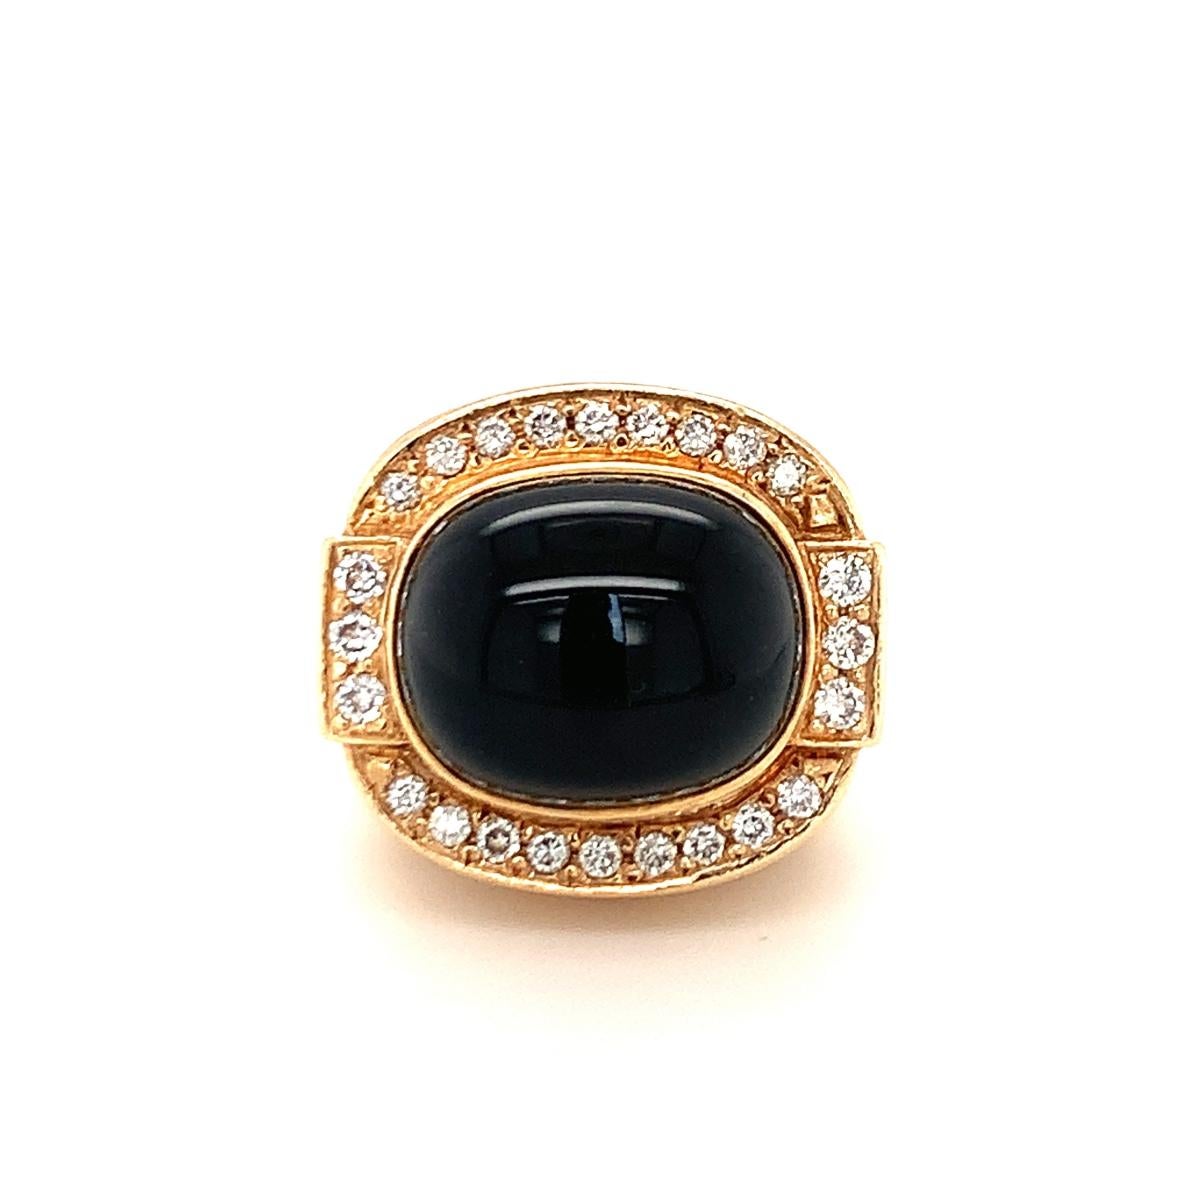 One black onyx and diamond dome 14K yellow gold ring with a tiered / raised design centering one oval cabochon onyx surrounded by 24 round brilliant cut diamonds totaling 0.70 ct. Circa 1970s.

Grandiose, inky, distinct.

Additional